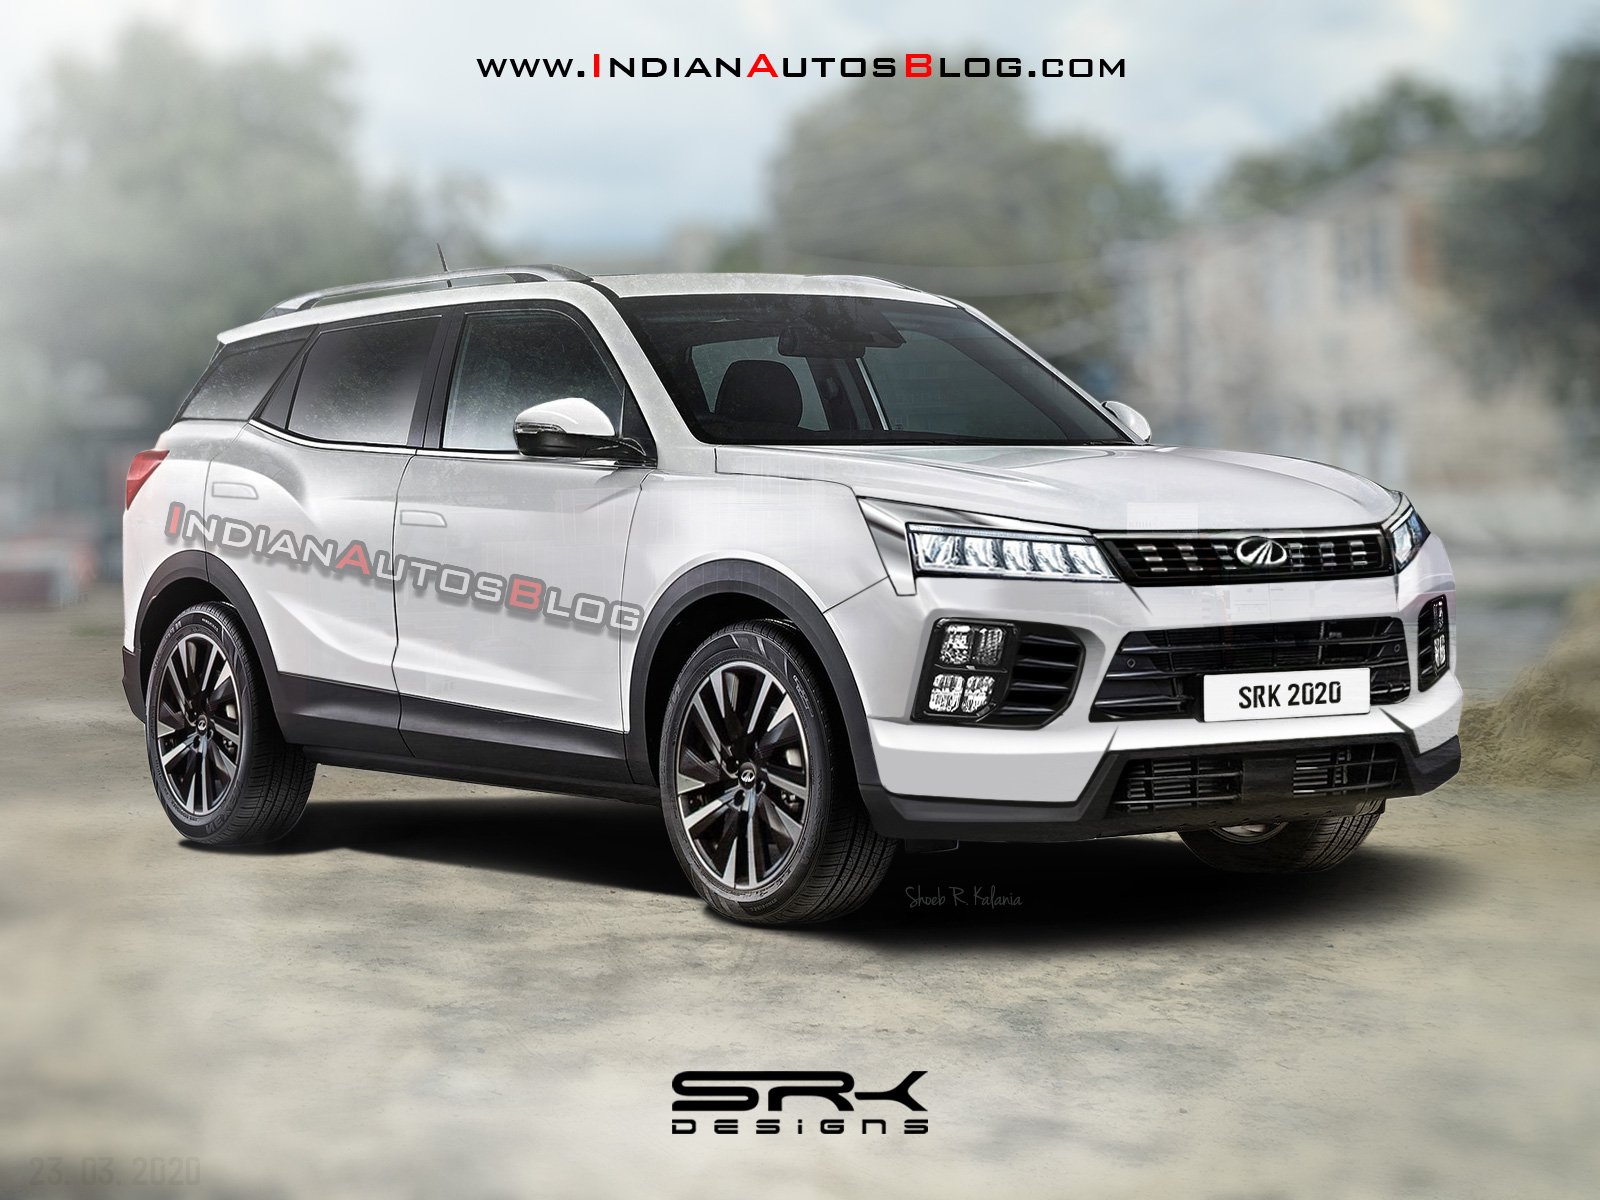 Next-gen Mahindra XUV500 Rendered Based on Funster Concept and Ssangyong Korando